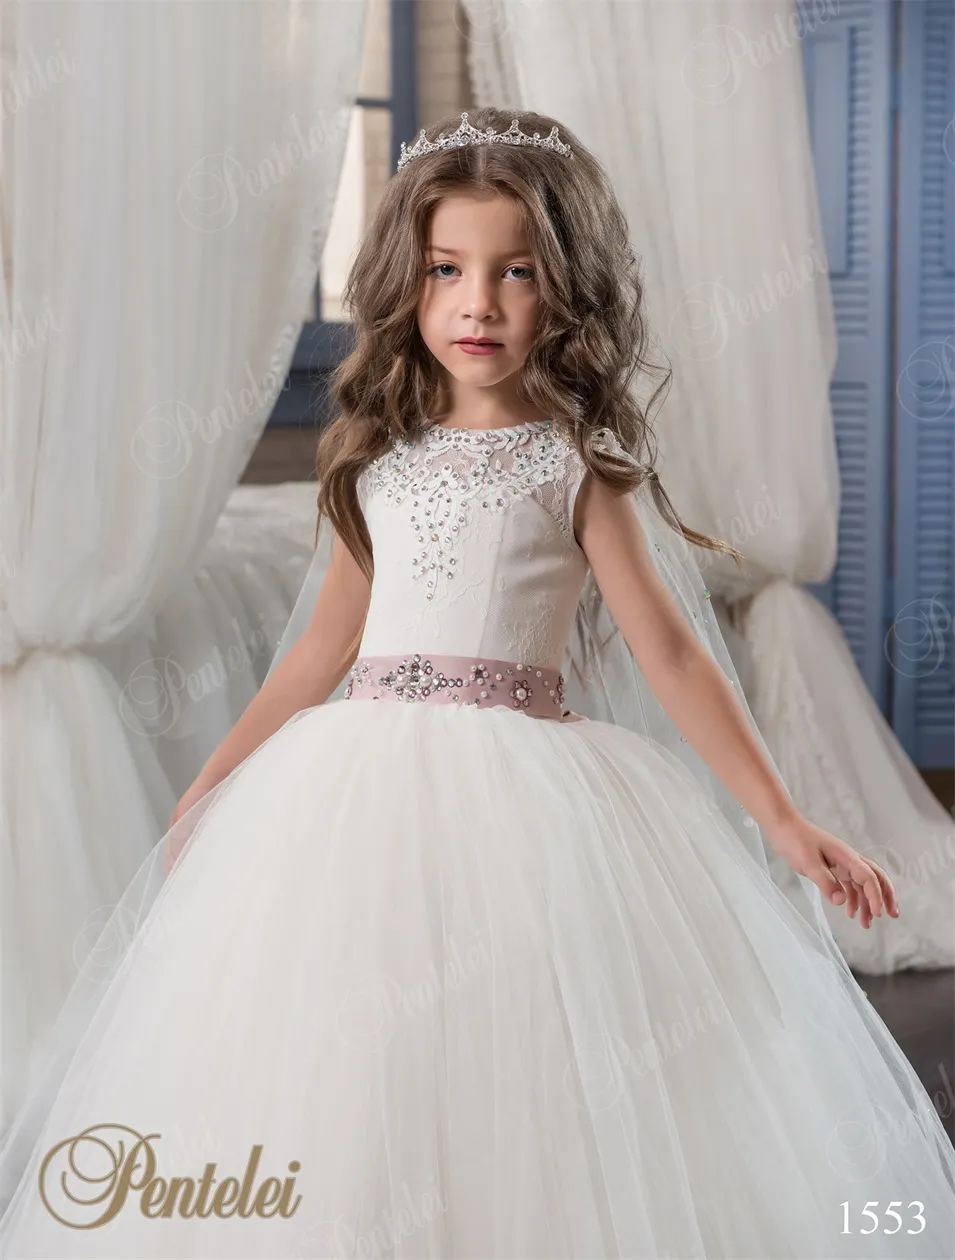 Kids Wedding Dresses With Wraps Pentelei With Beaded Sash And Lace Up ...